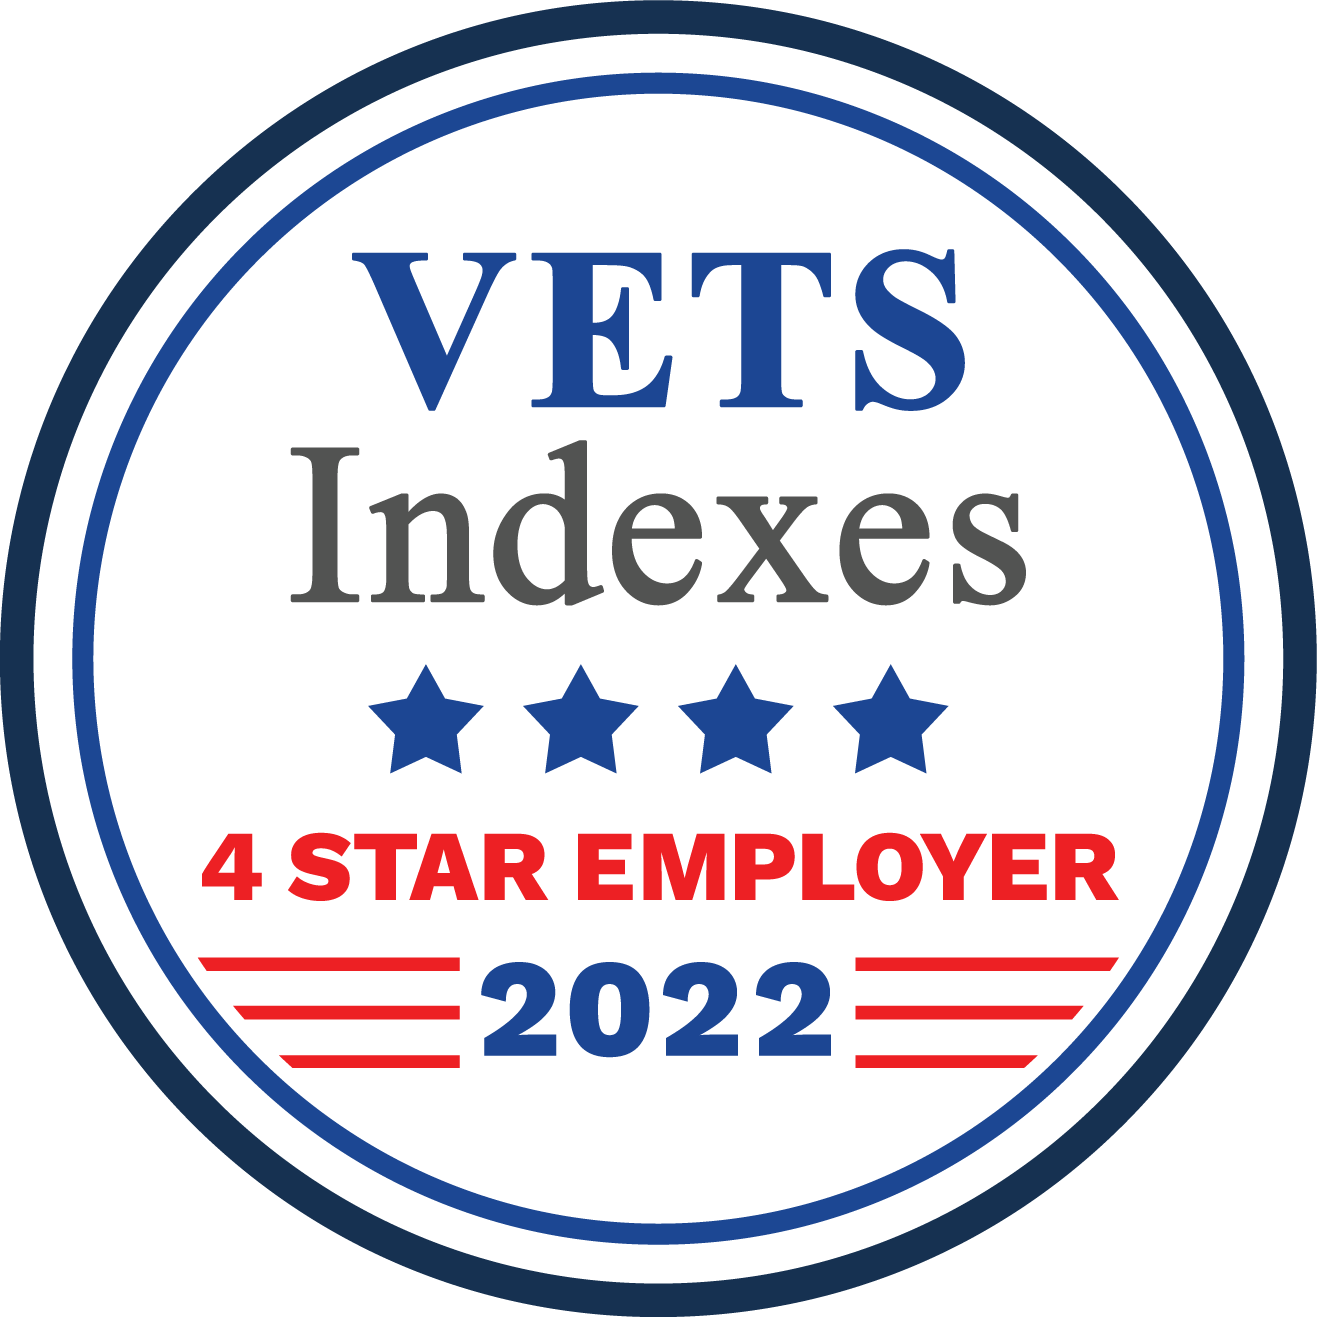 Vets Indexes 4-Star Employer 2022 logo